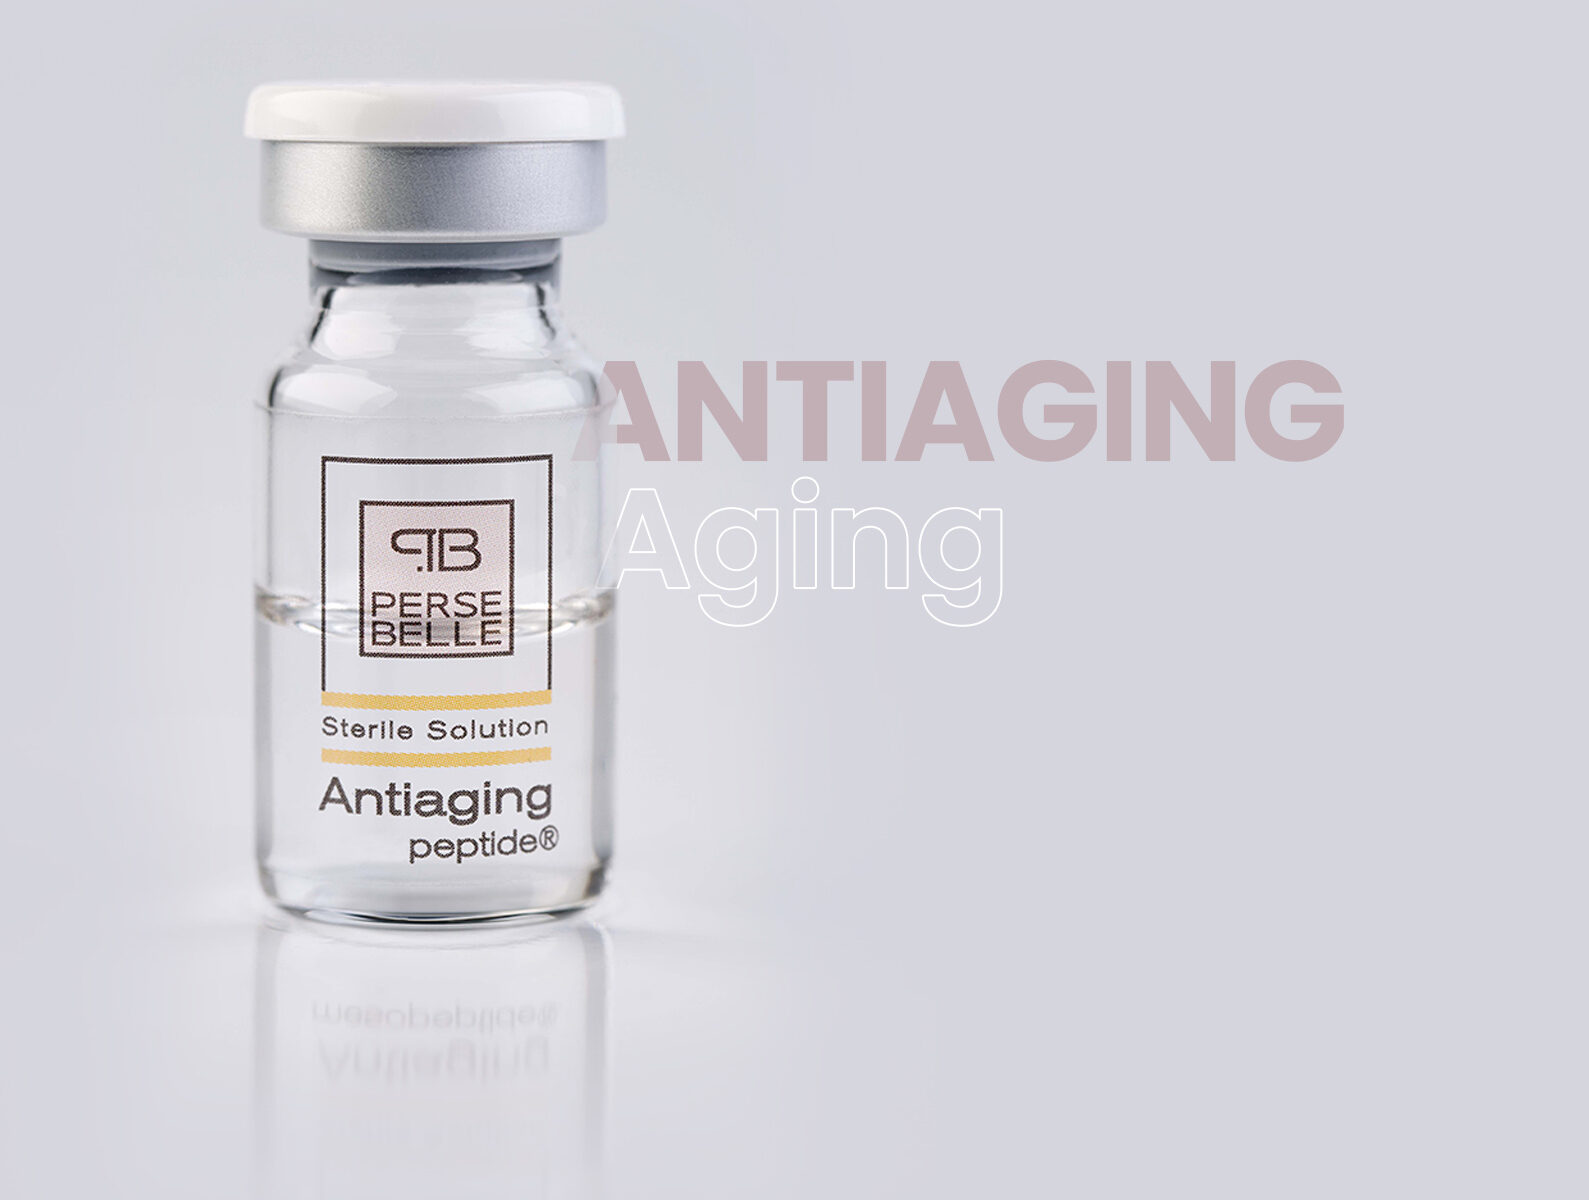 Anti-aging peptides treatments for professionals of mesotherapy - Perbelle